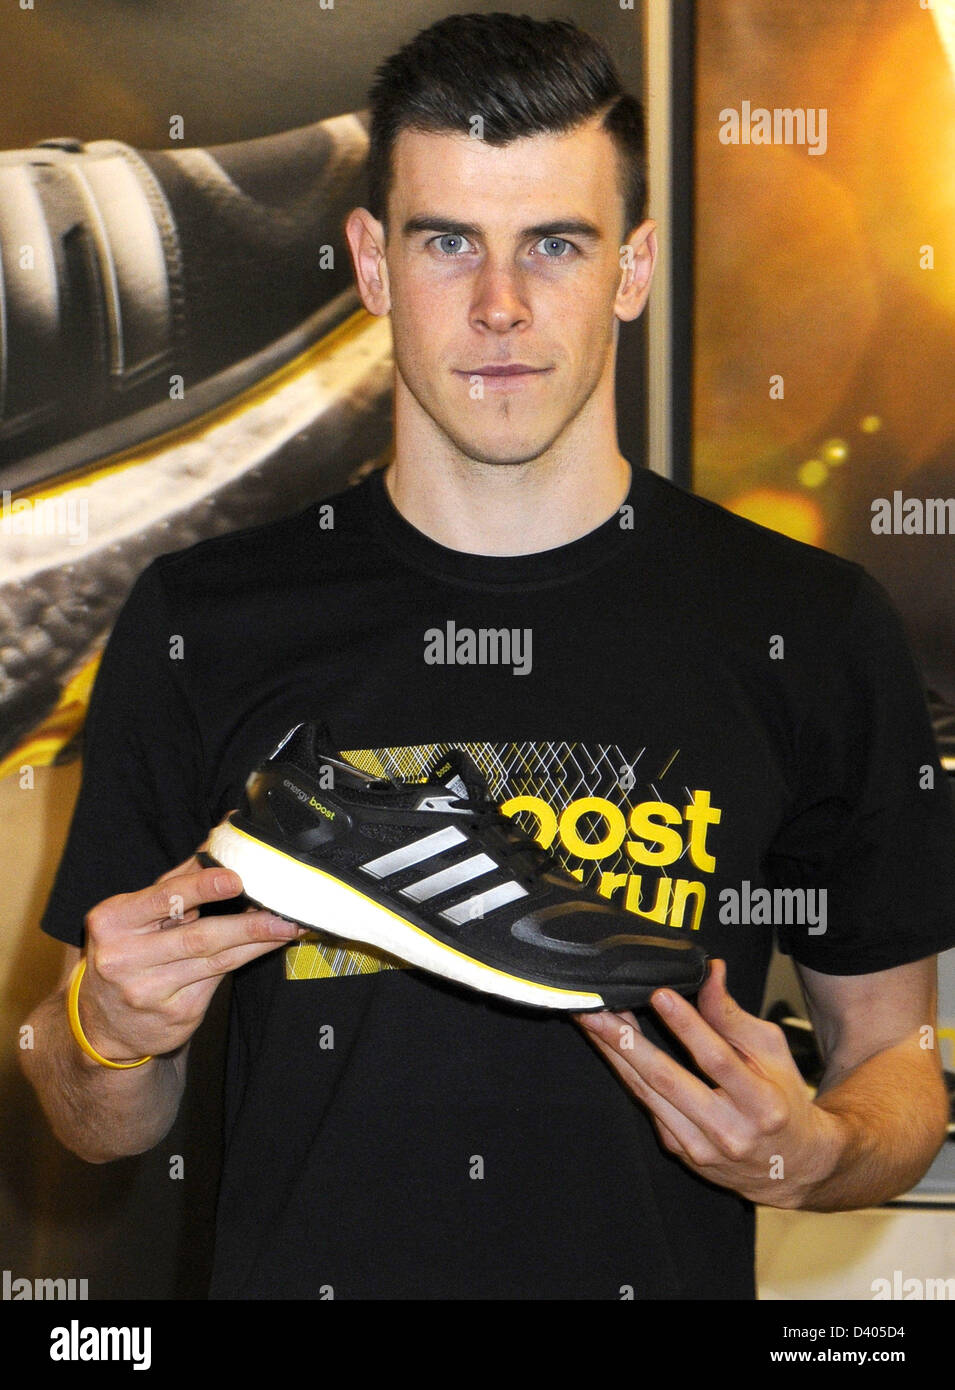 London, UK. 27th Feb 2013. Tottenham Hotspur footballer Gareth Bale meets  fans at a signing in the Adidas Store, Oxford Street. London to promote  Adidas Running Boost Experience. Bale is currently one